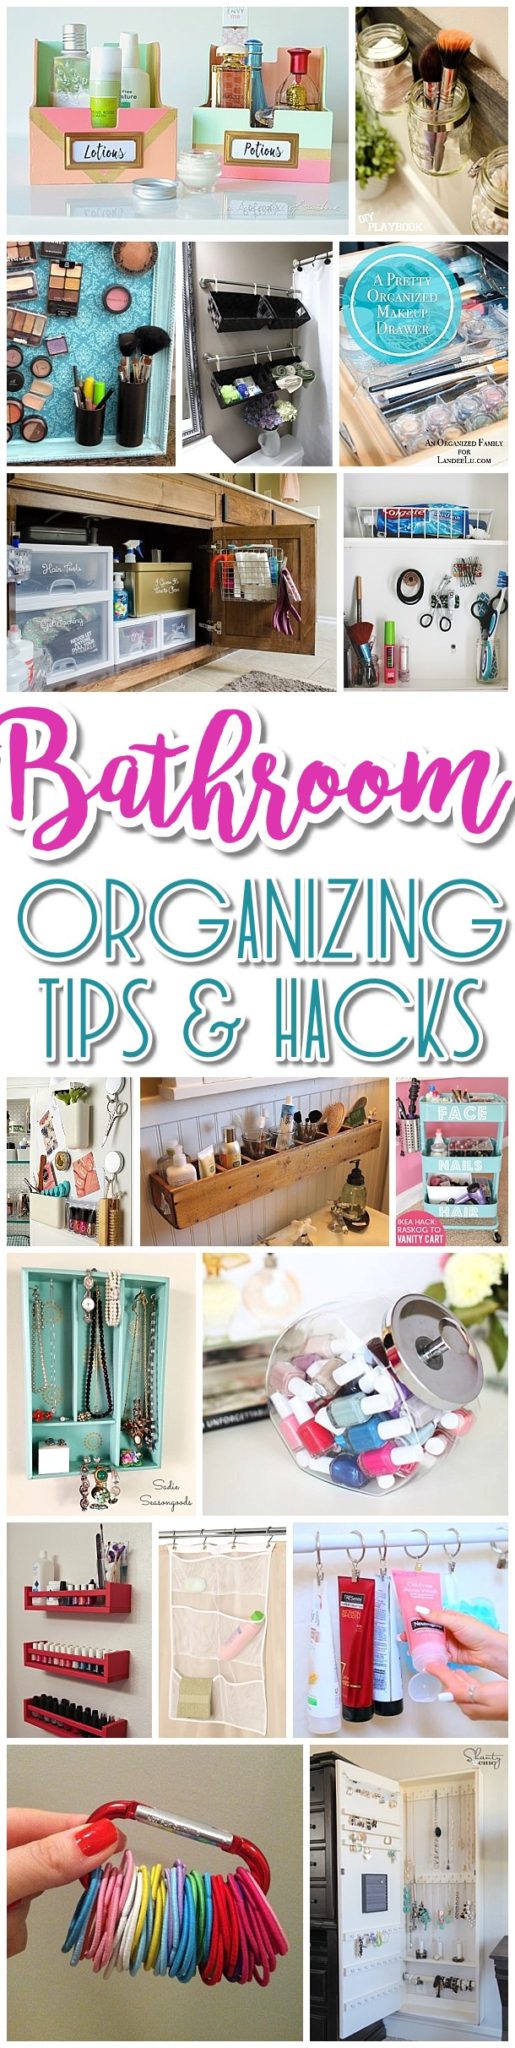 EASY Inexpensive Do it Yourself Ways to Organize and Decorate your Bathroom and Vanity -The BEST DIY Space Saving Projects and Organizing Ideas on a DIY Budget - Dreaming in DIY #bathroomorganization #bathroomideas #bathroomhacks #bathroomtips #organizethebathroom